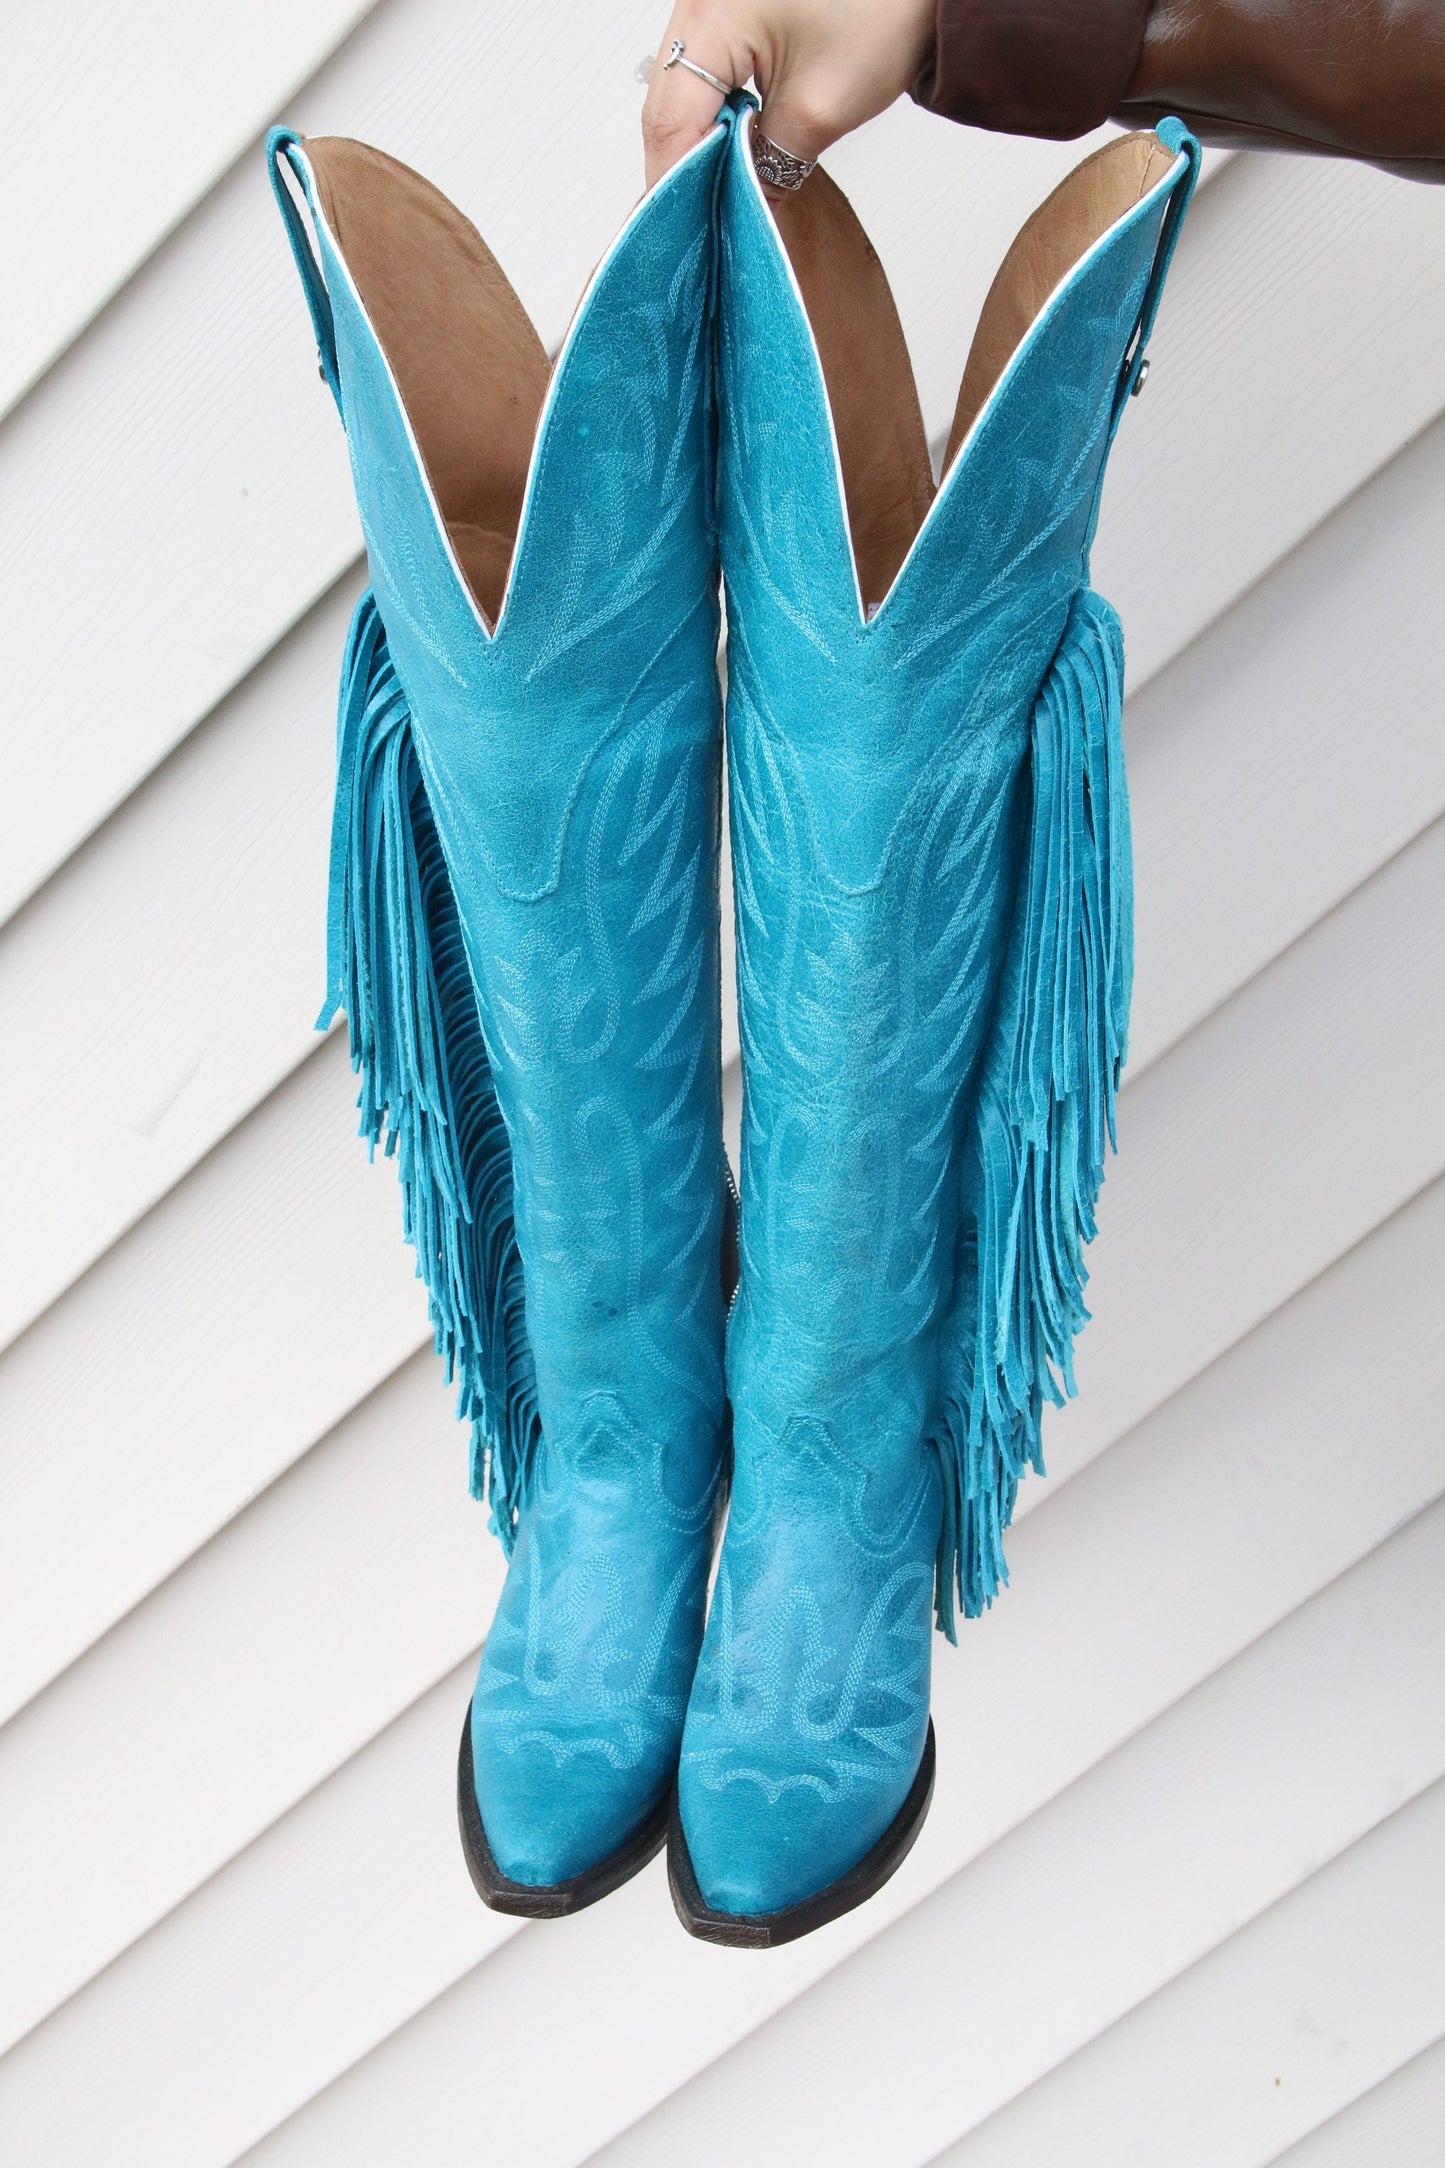 The Jessica XL Fringe Cowgirl Boot